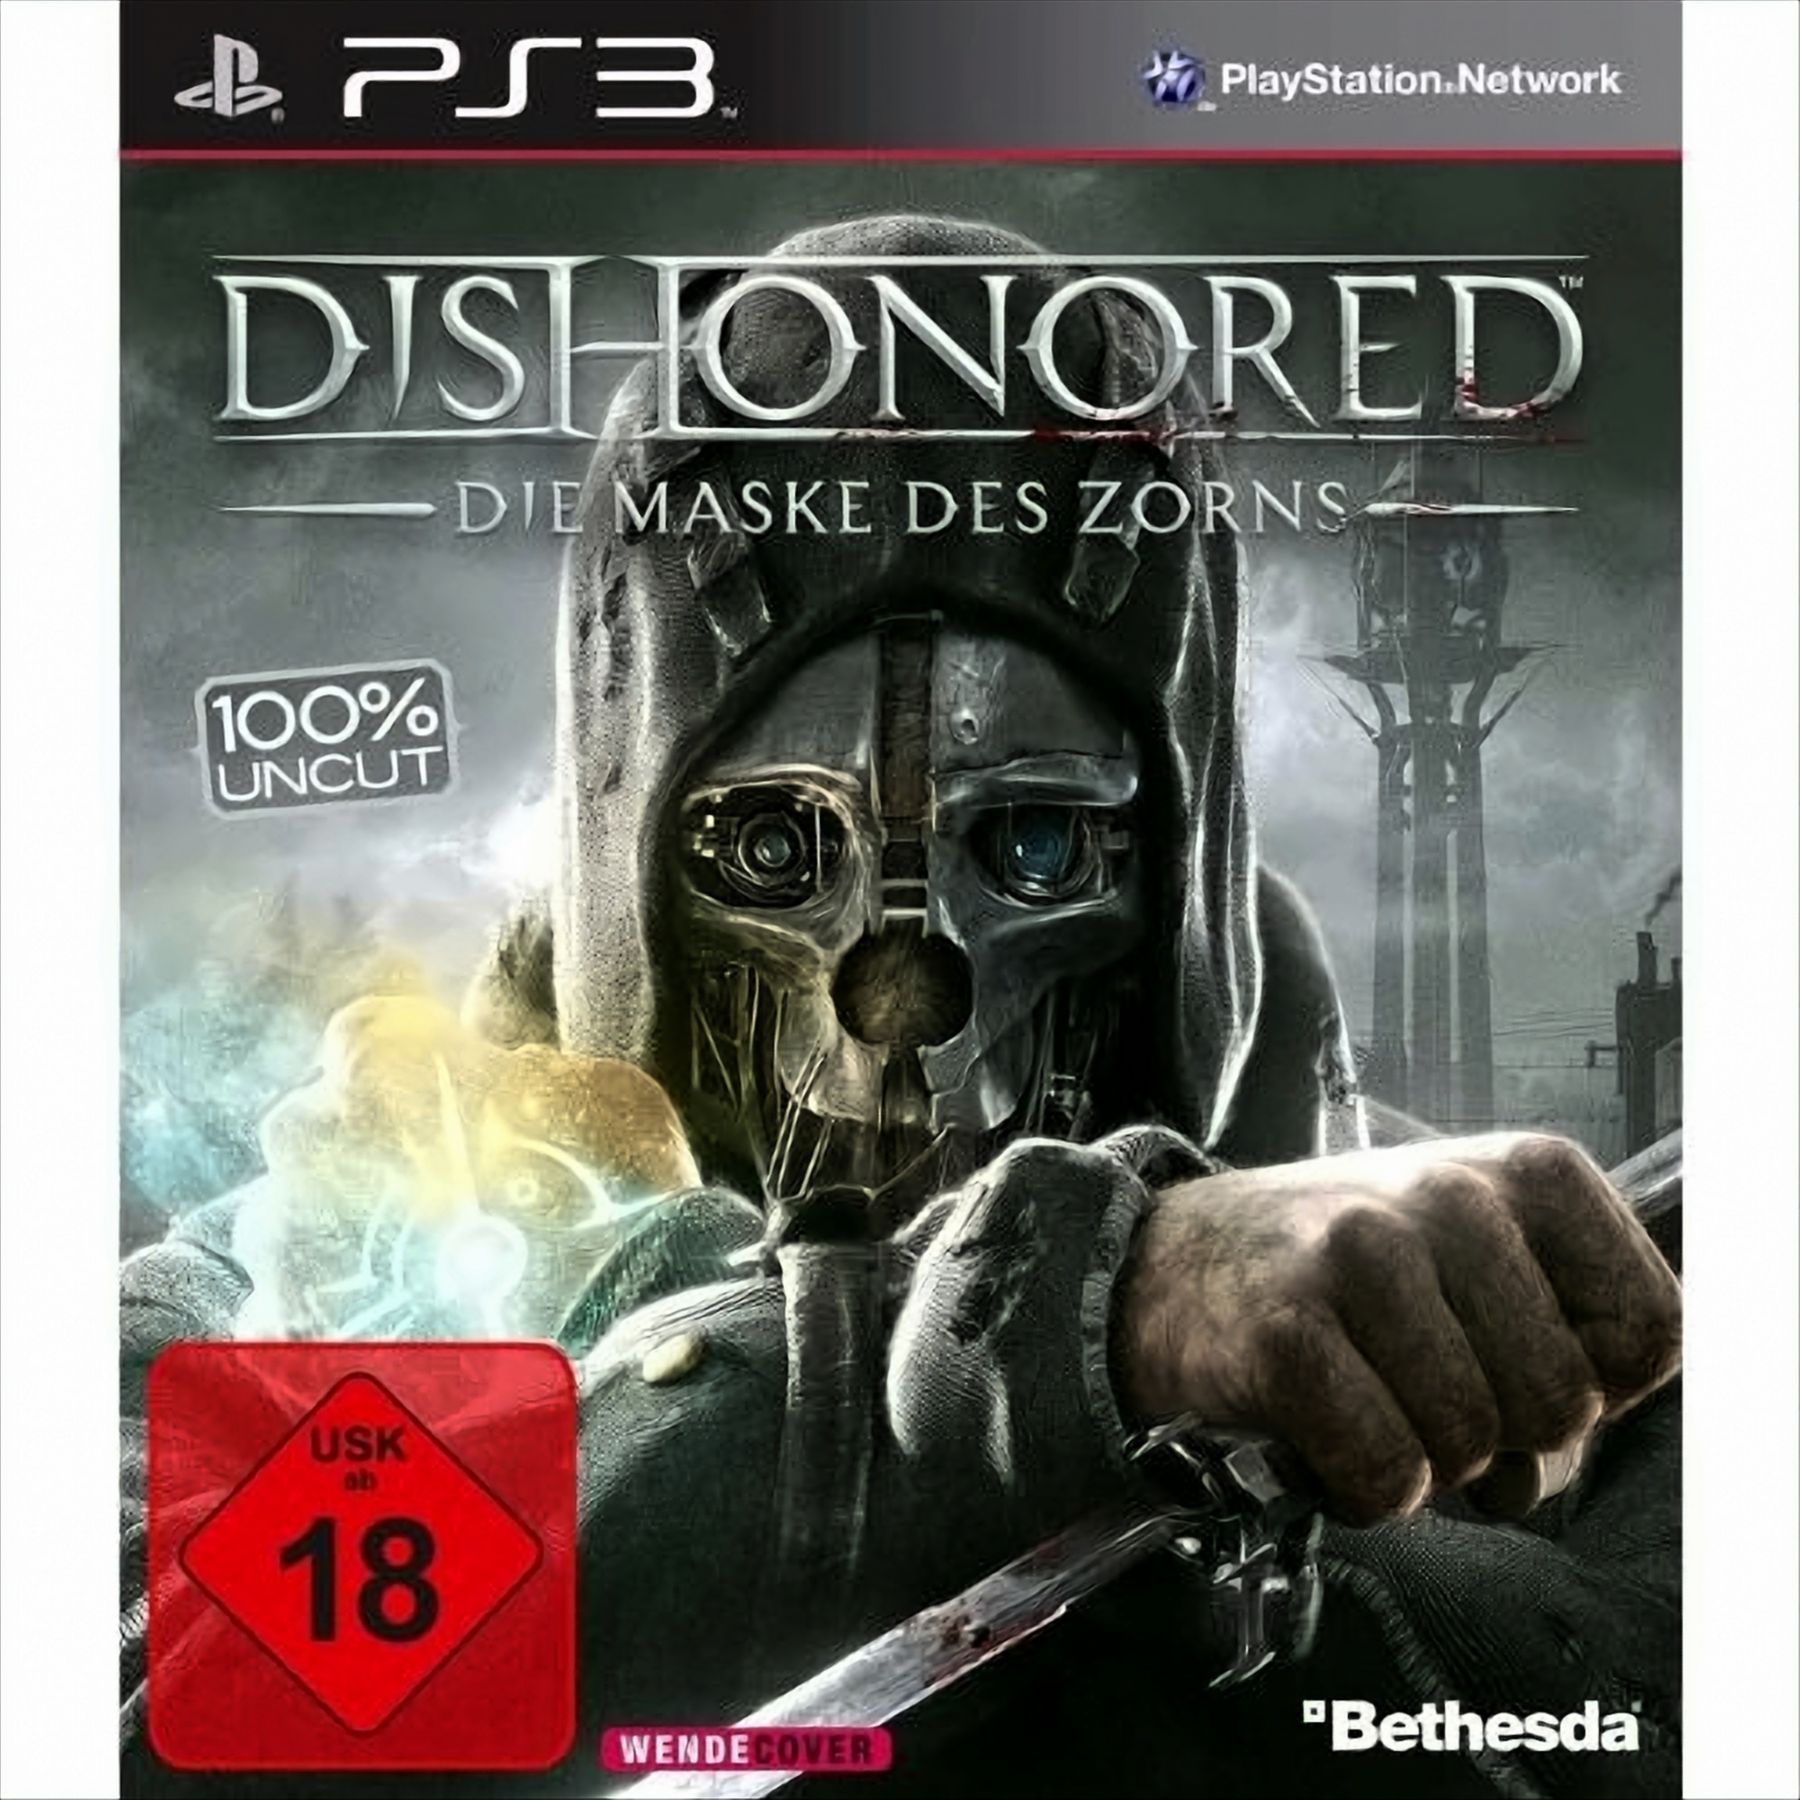 - PS-3 3] [PlayStation Dishonored